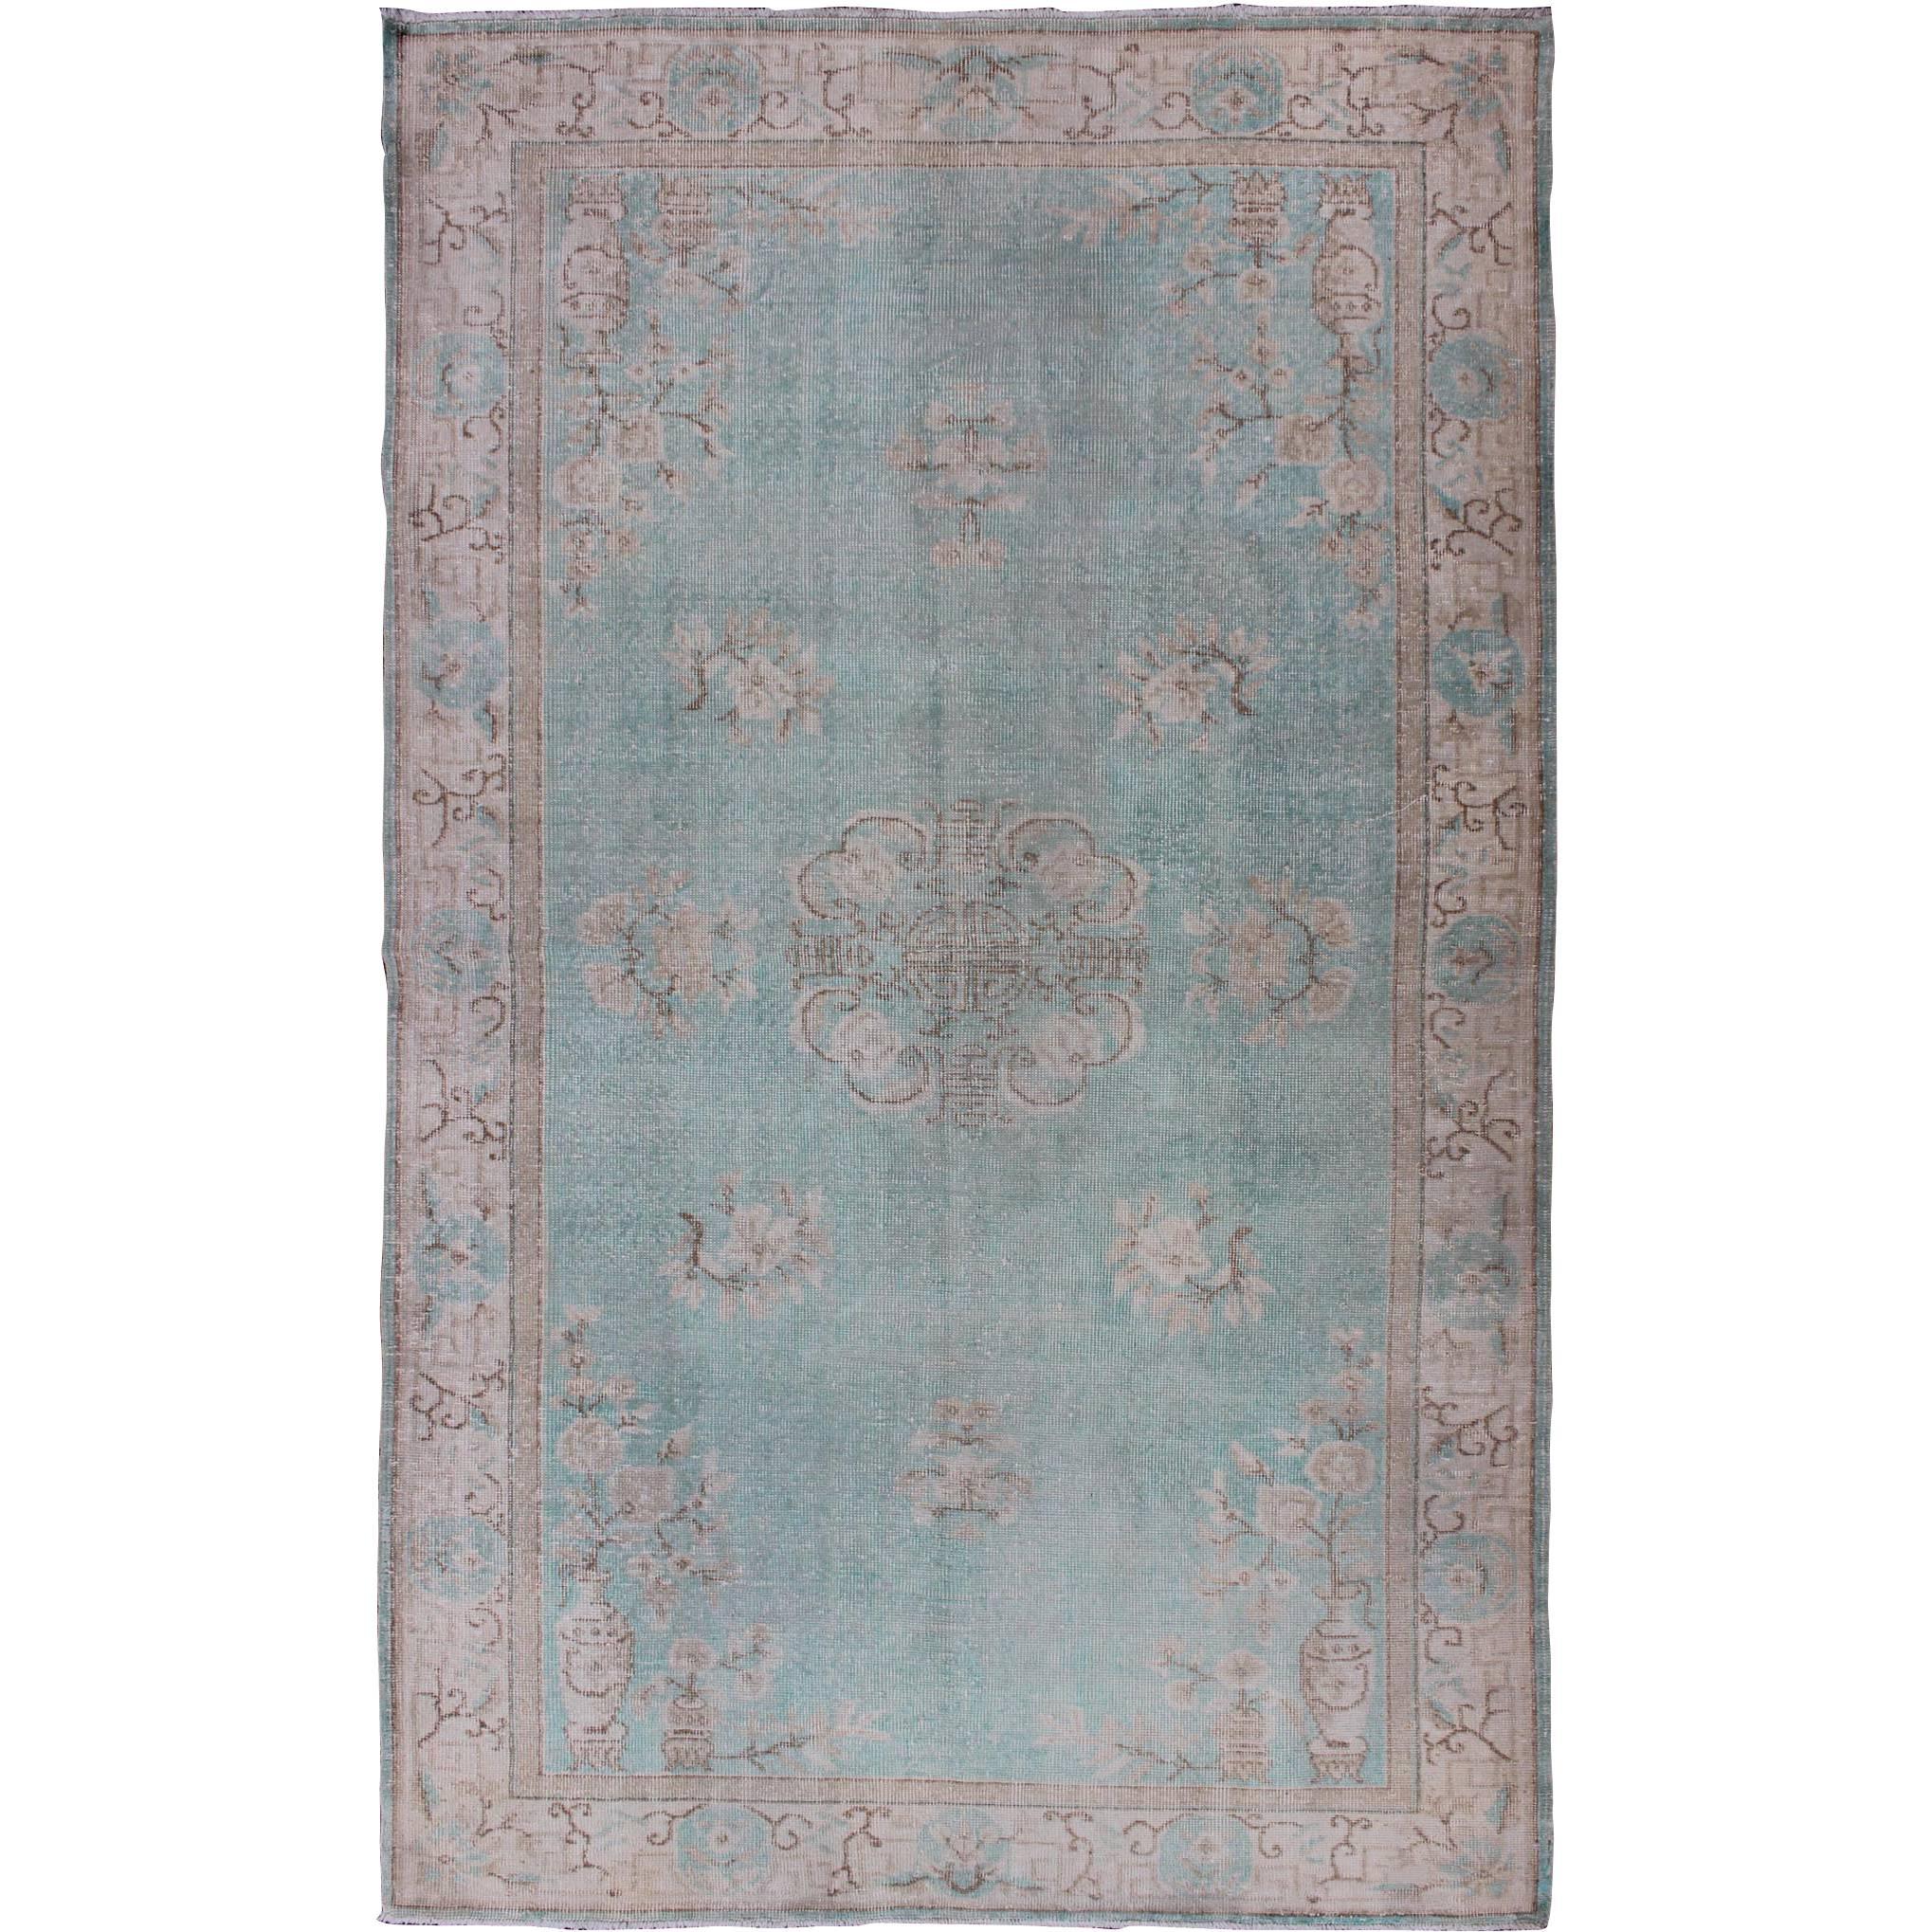 Vintage Turkish Rug with Khotan Design in Sea Foam Blue, Taupe and Light Brown